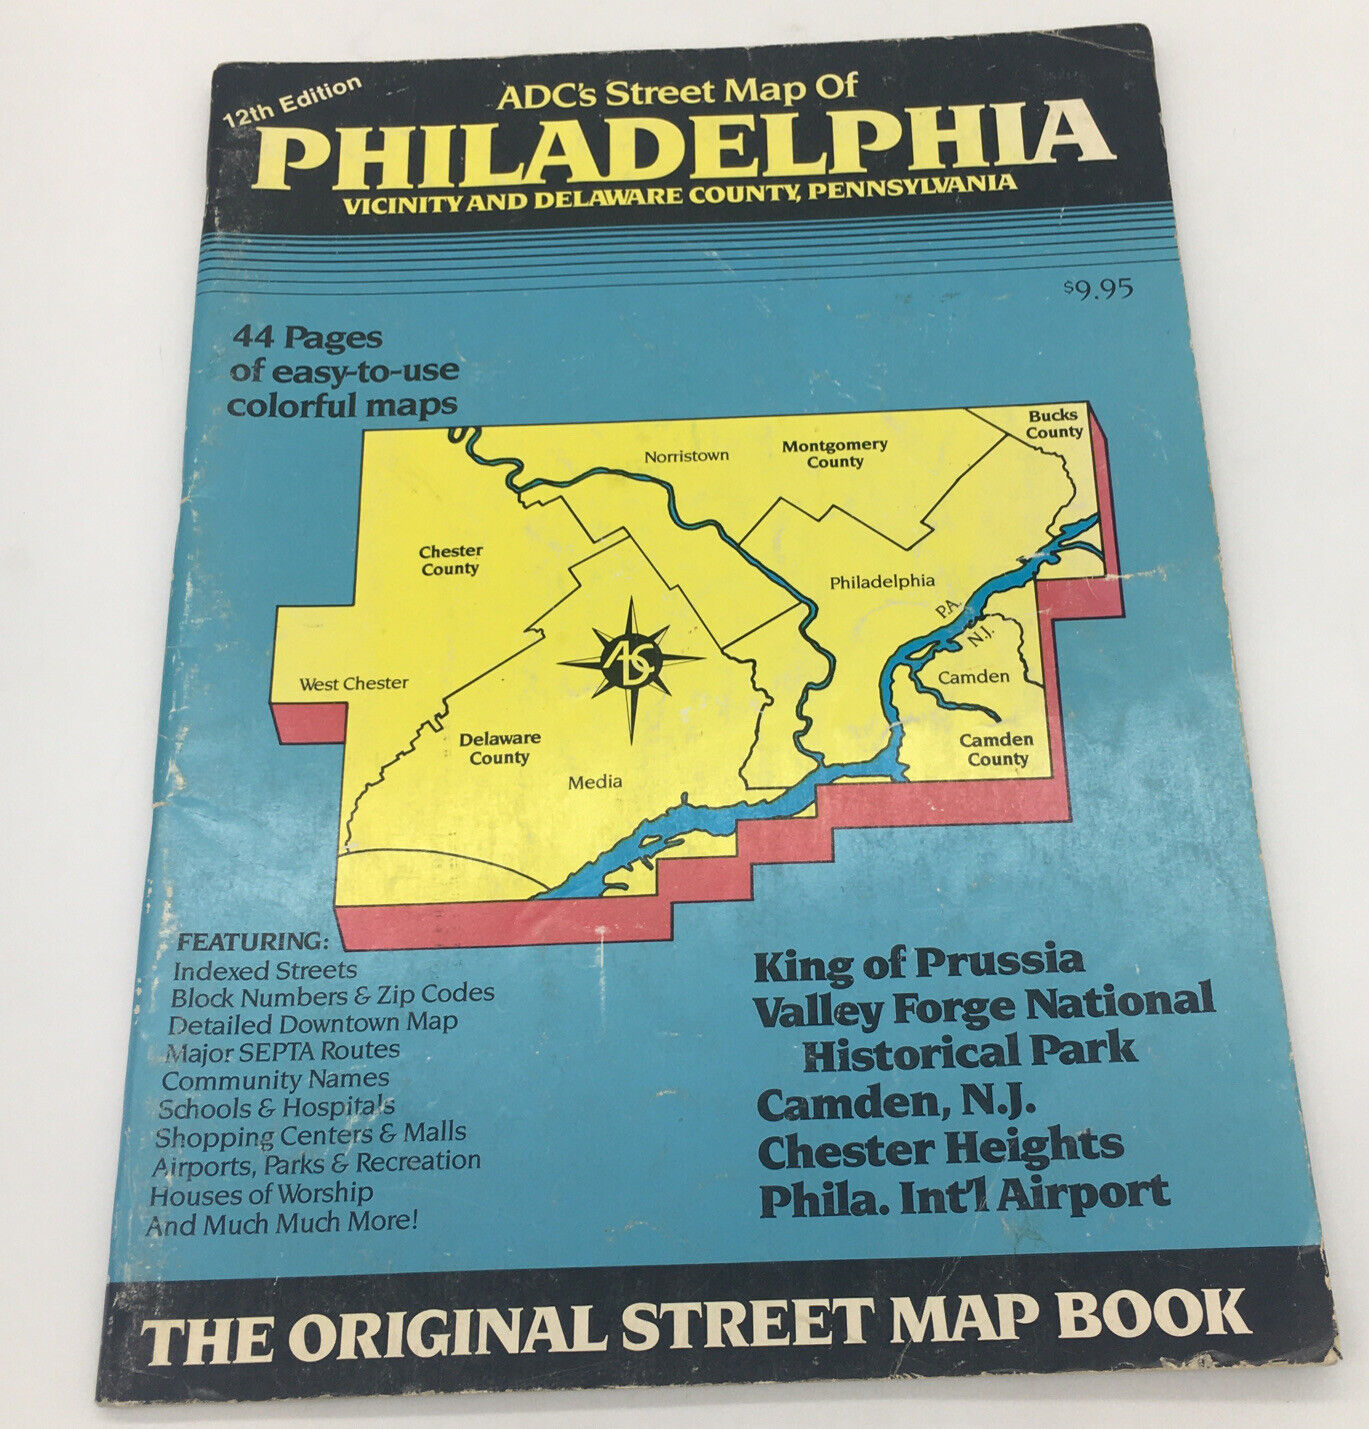 ADC’s Street Map Of Philadelphia Vicinity & Delaware County PA 12th Edition